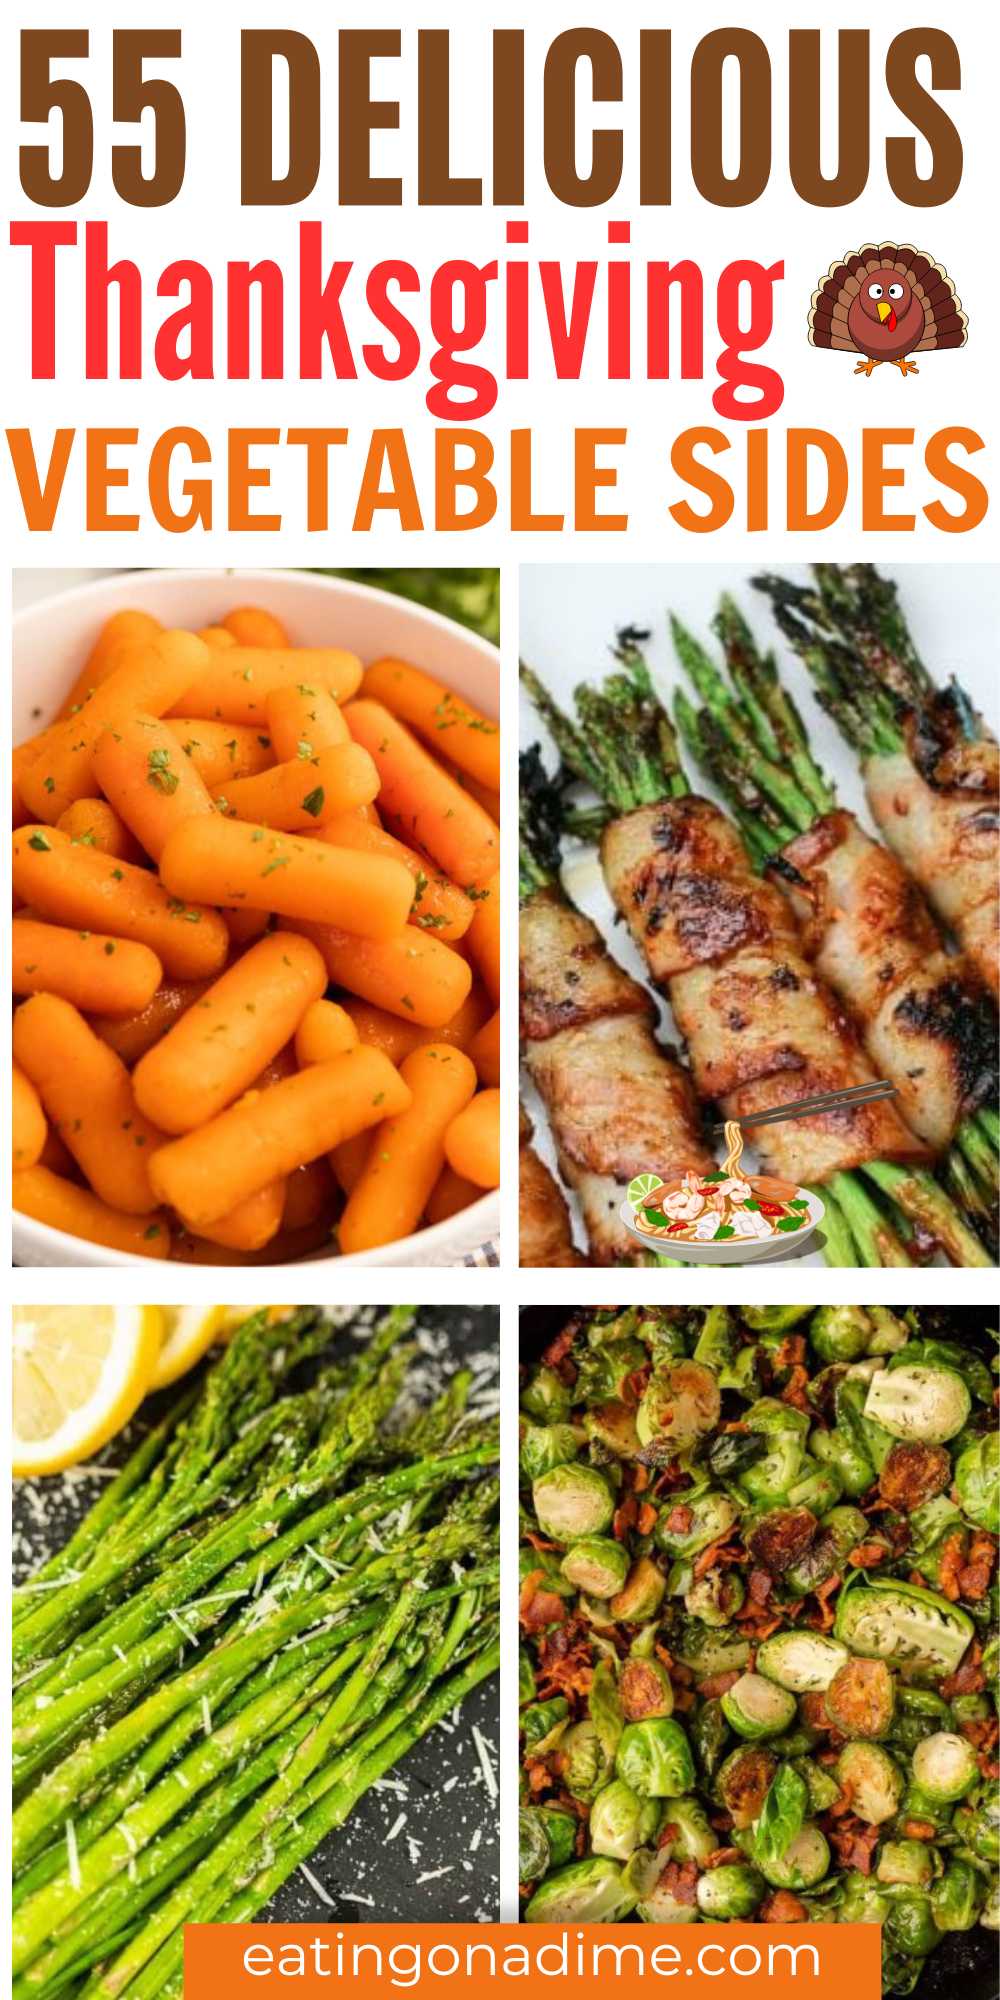 Every Thanksgiving should have delicious Thanksgiving vegetable sides. These 55 recipes are all so tasty and healthy. If you are looking for delicious side dishes other than stuffing, make one of these vegetable recipes. #eatingonadime #thanksgivingvegetablesides #vegetablesides